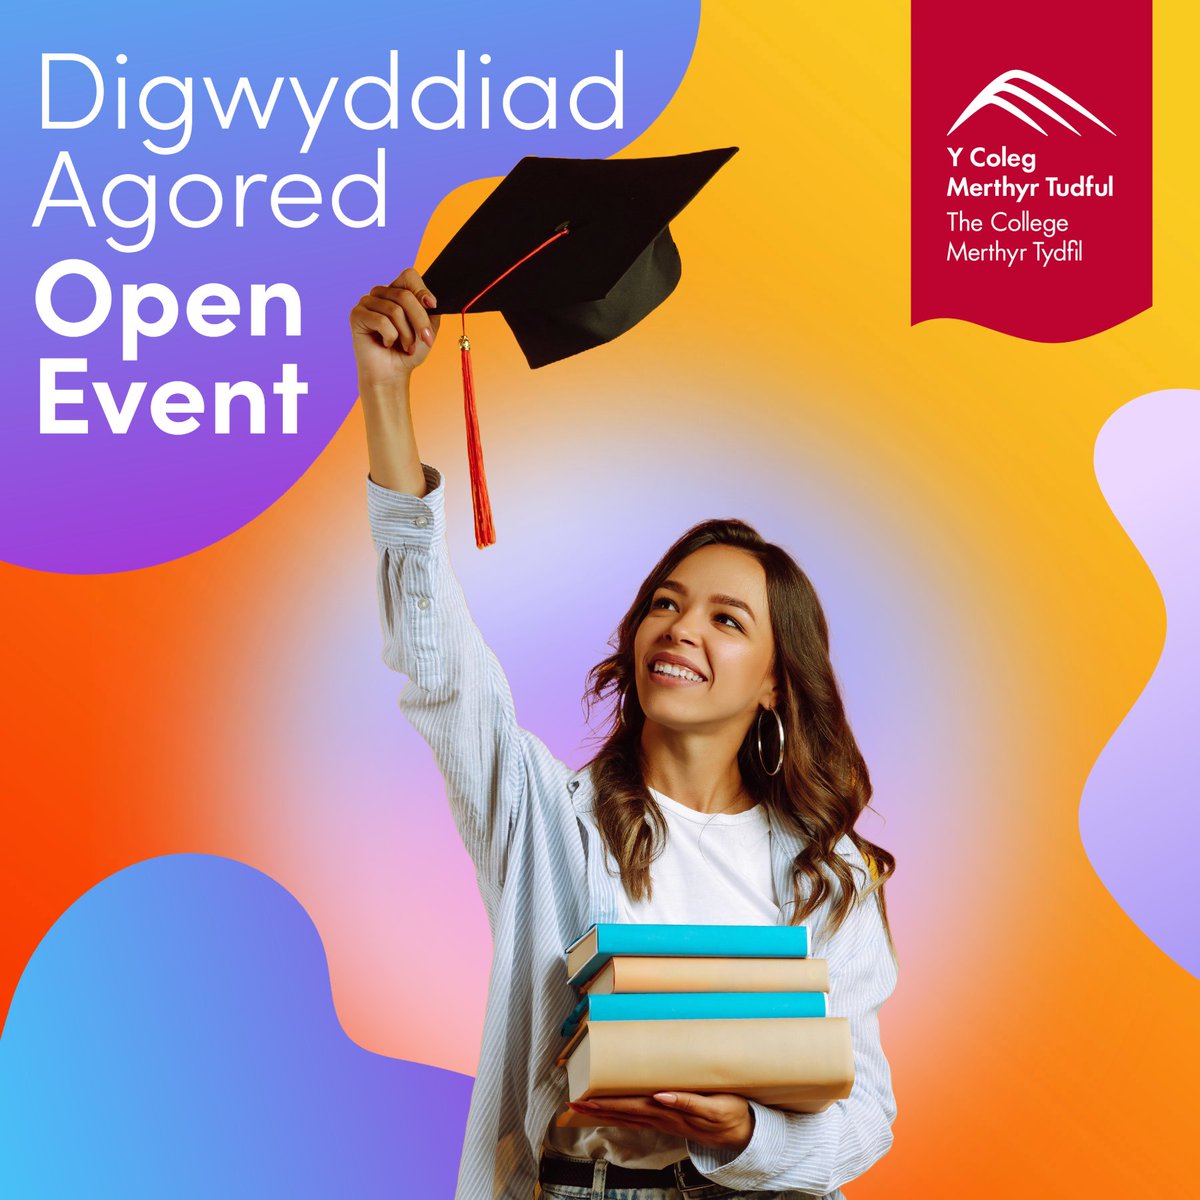 🎓Study local, go far at The College Merthyr Tydfil Study Local, Go Far at The College Merthyr Tydfil! 💫 Join us for our HE and Part-Time Open Event: 📅 Date: 20th May 2024 🕔 Time: 5:00 PM - 7:00 PM 🔗forms.office.com/e/cx7LWihfQW We can’t wait to meet you!